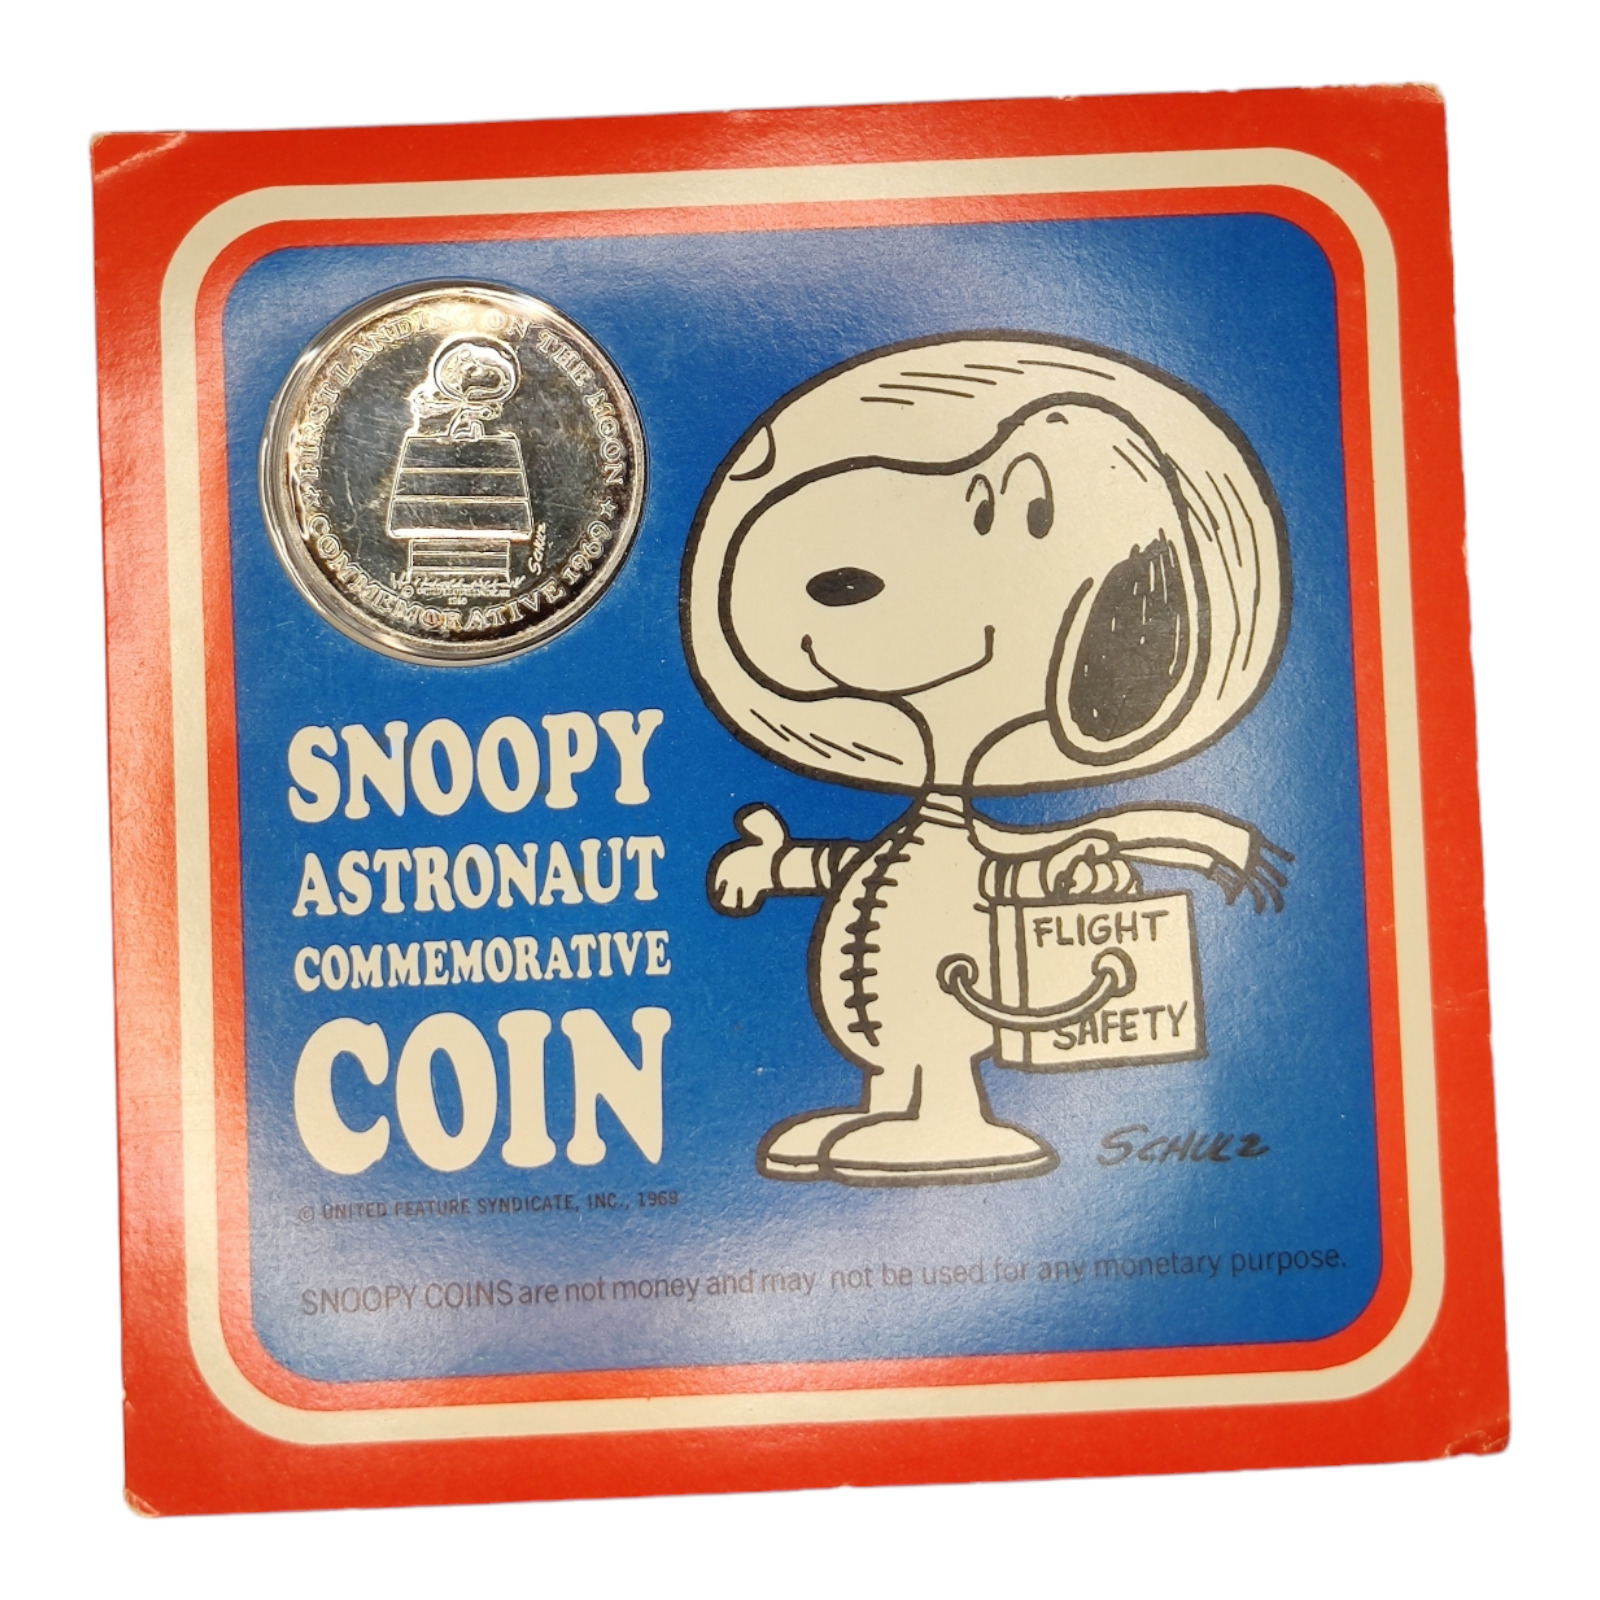 SNOOPY ASTRONAUT COMMEMORATIVE COIN 1969 NEW Sealed Package 4